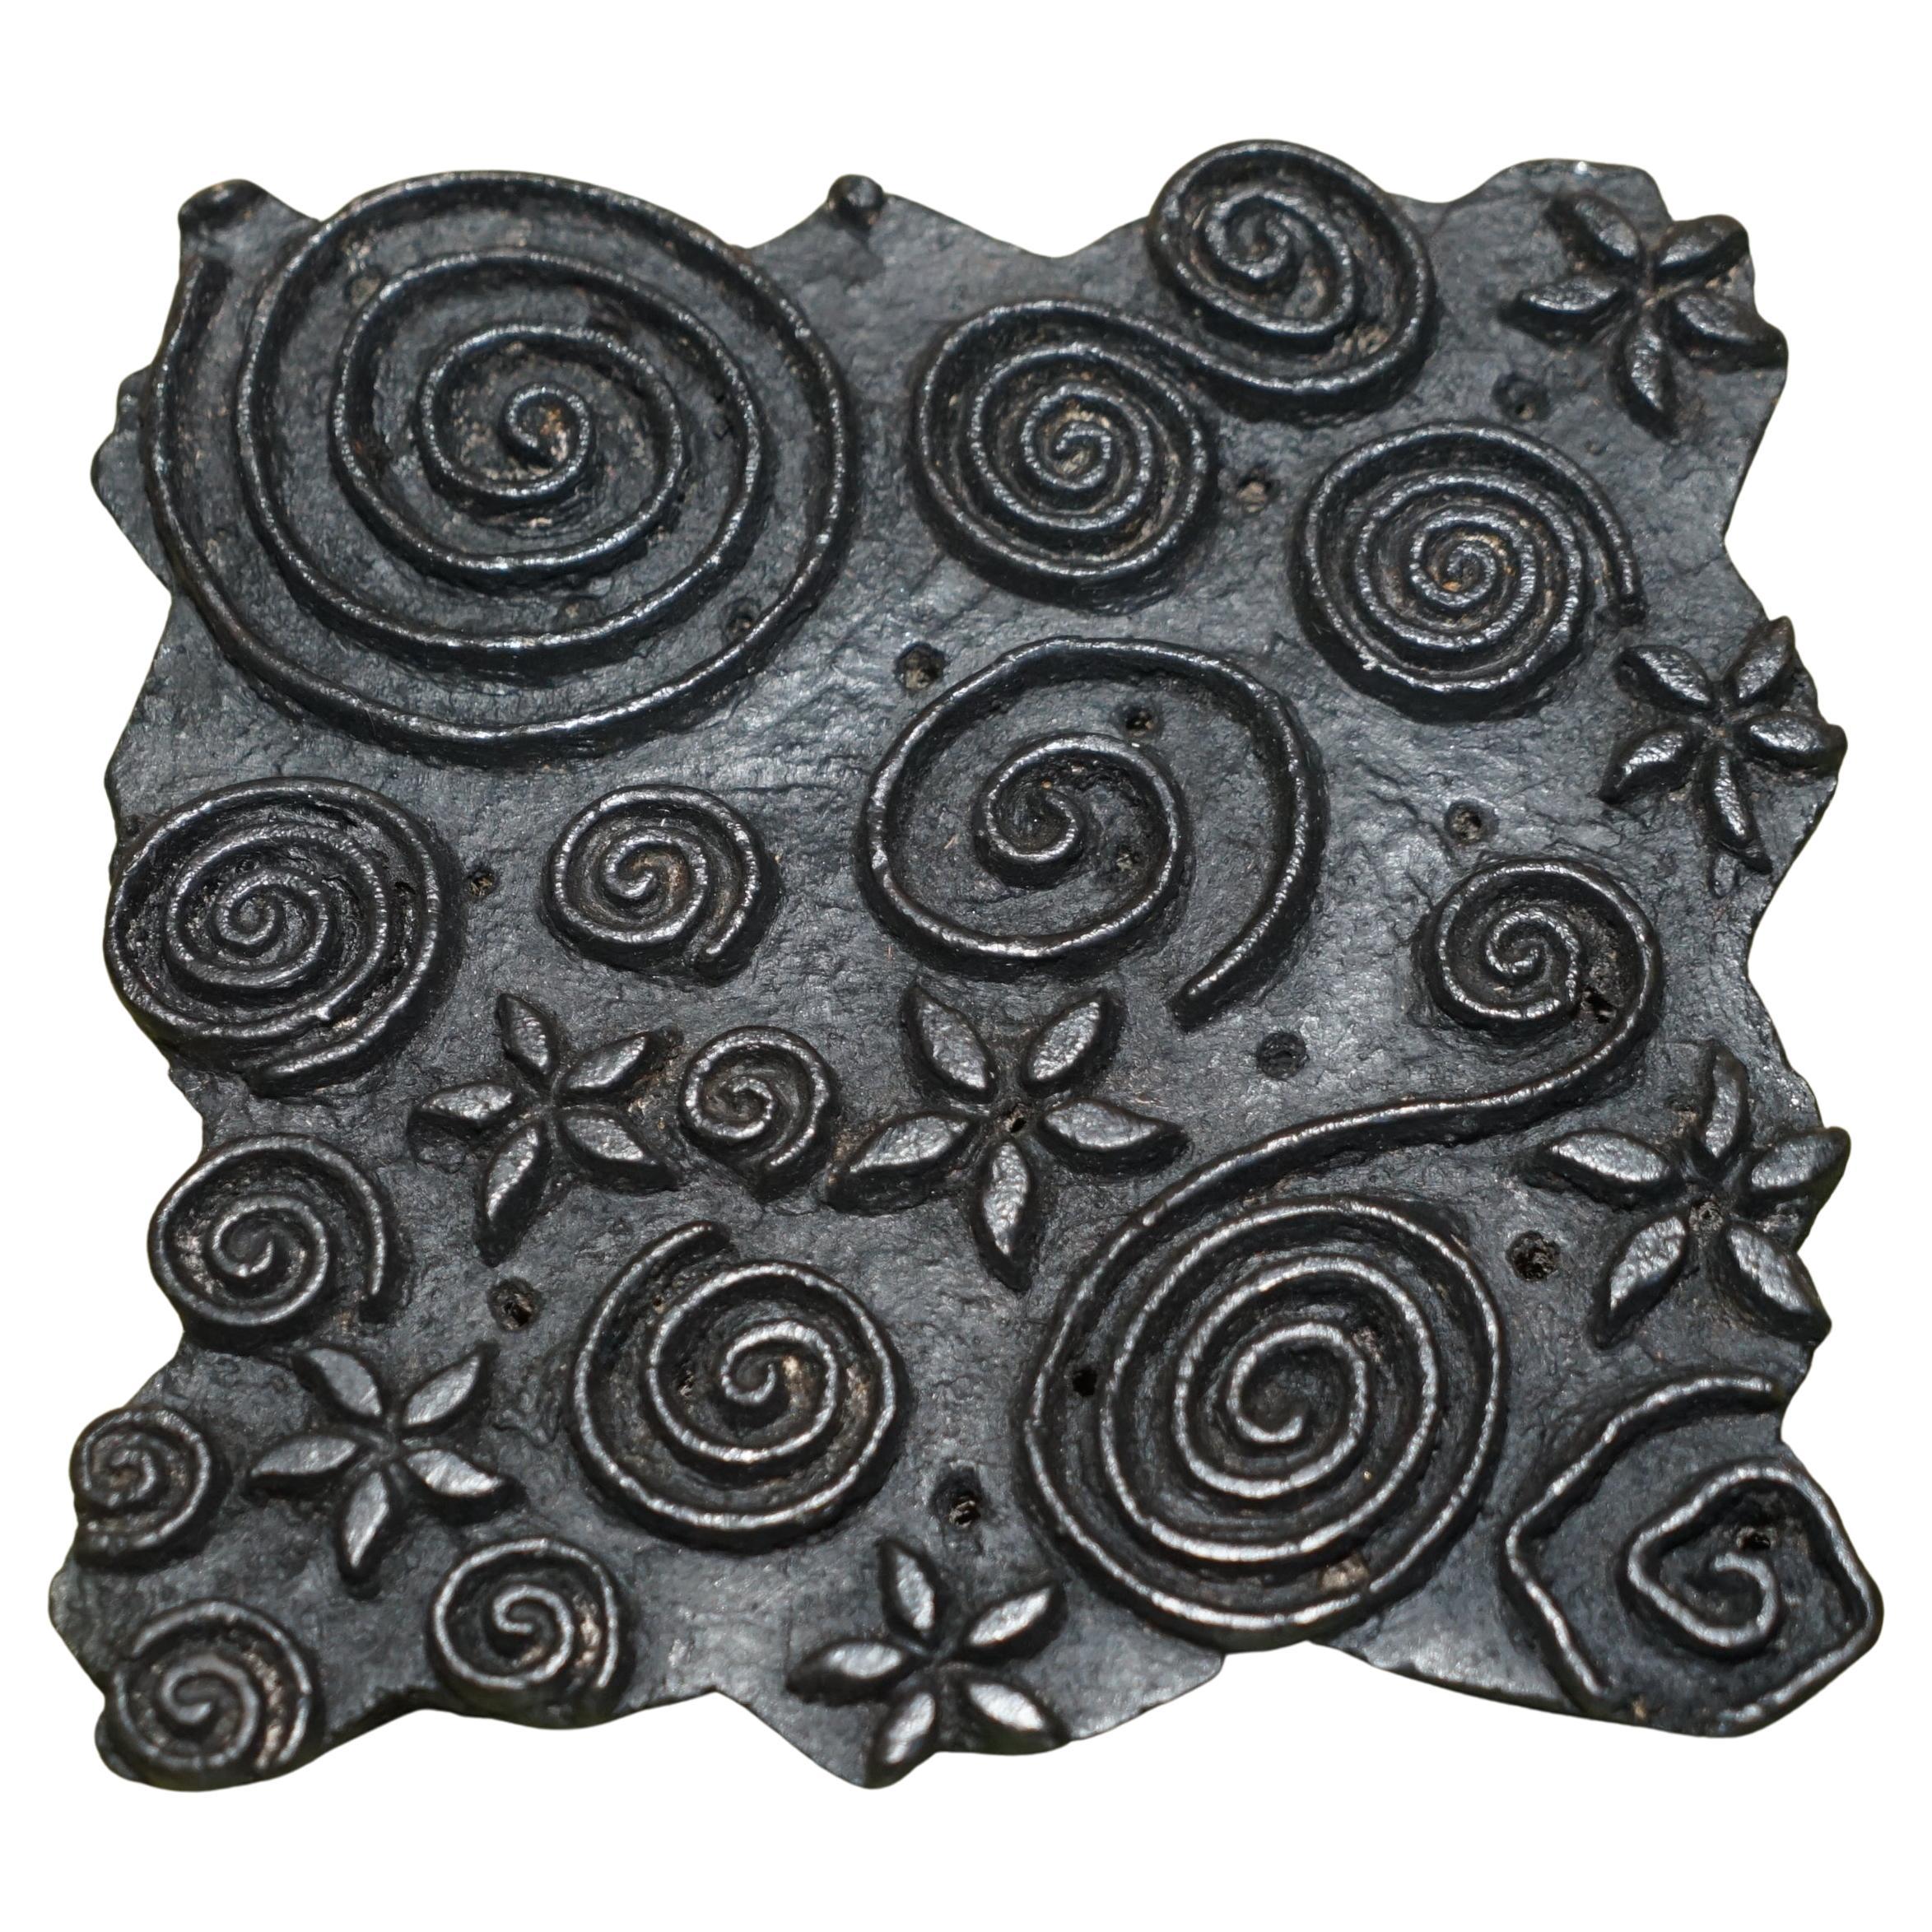 Swirly Very Collectable Antique Hand Carved Floral Printing Block for Wallpaper For Sale